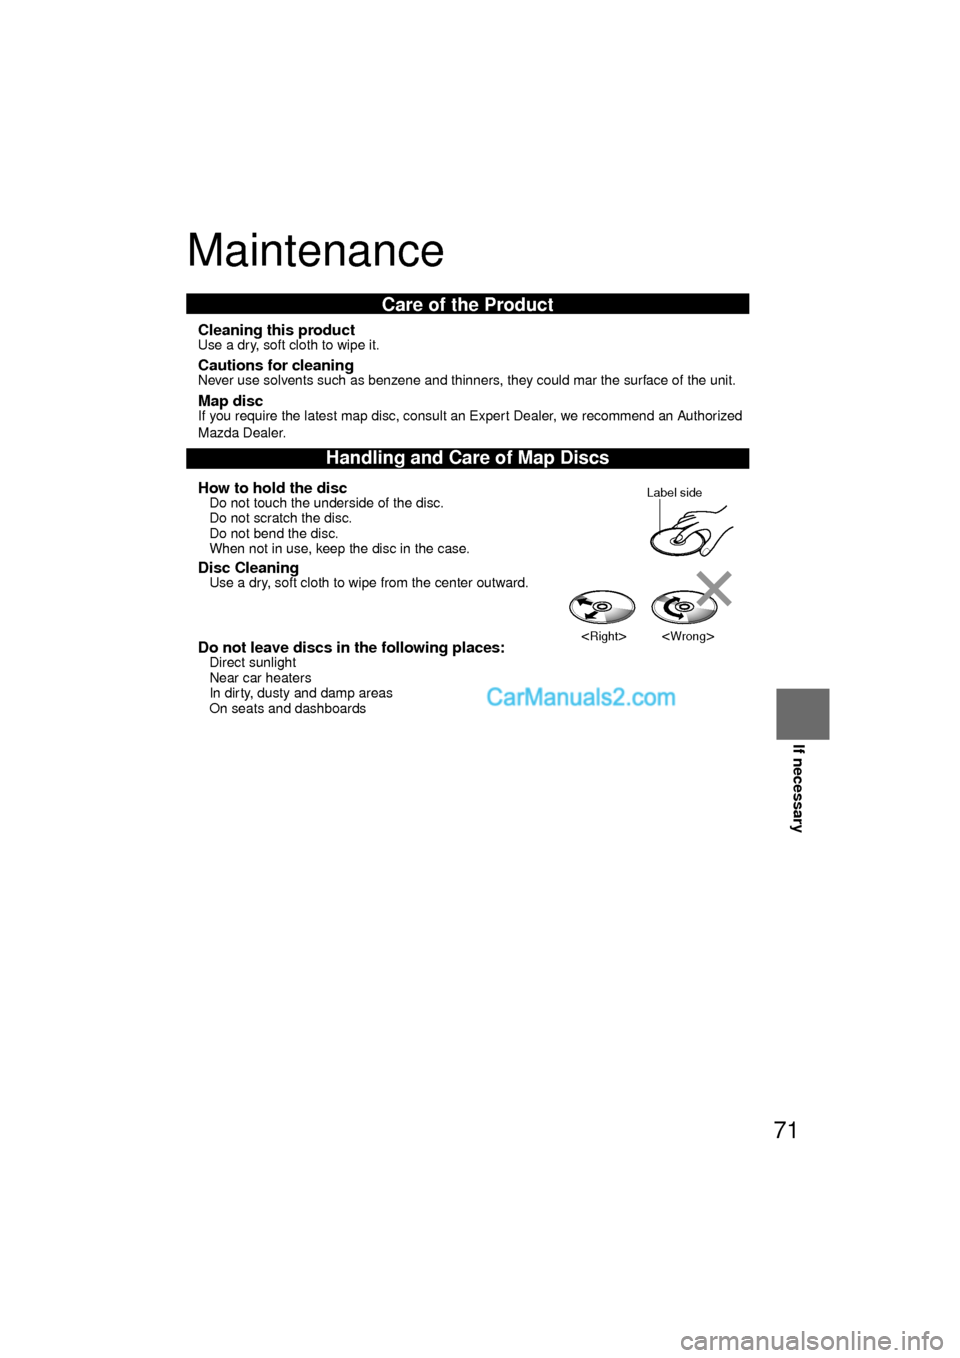 MAZDA MODEL CX-9 2010  Navigation Manual (in English) 71
Before 
UseGetting
started
RoutingAddress 
BookVo i c e  
Recognition
Navigation 
Set Up
If necessary
Maintenance
nCleaning this productUse a dry, soft cloth to wipe it.
nCautions for cleaningNever